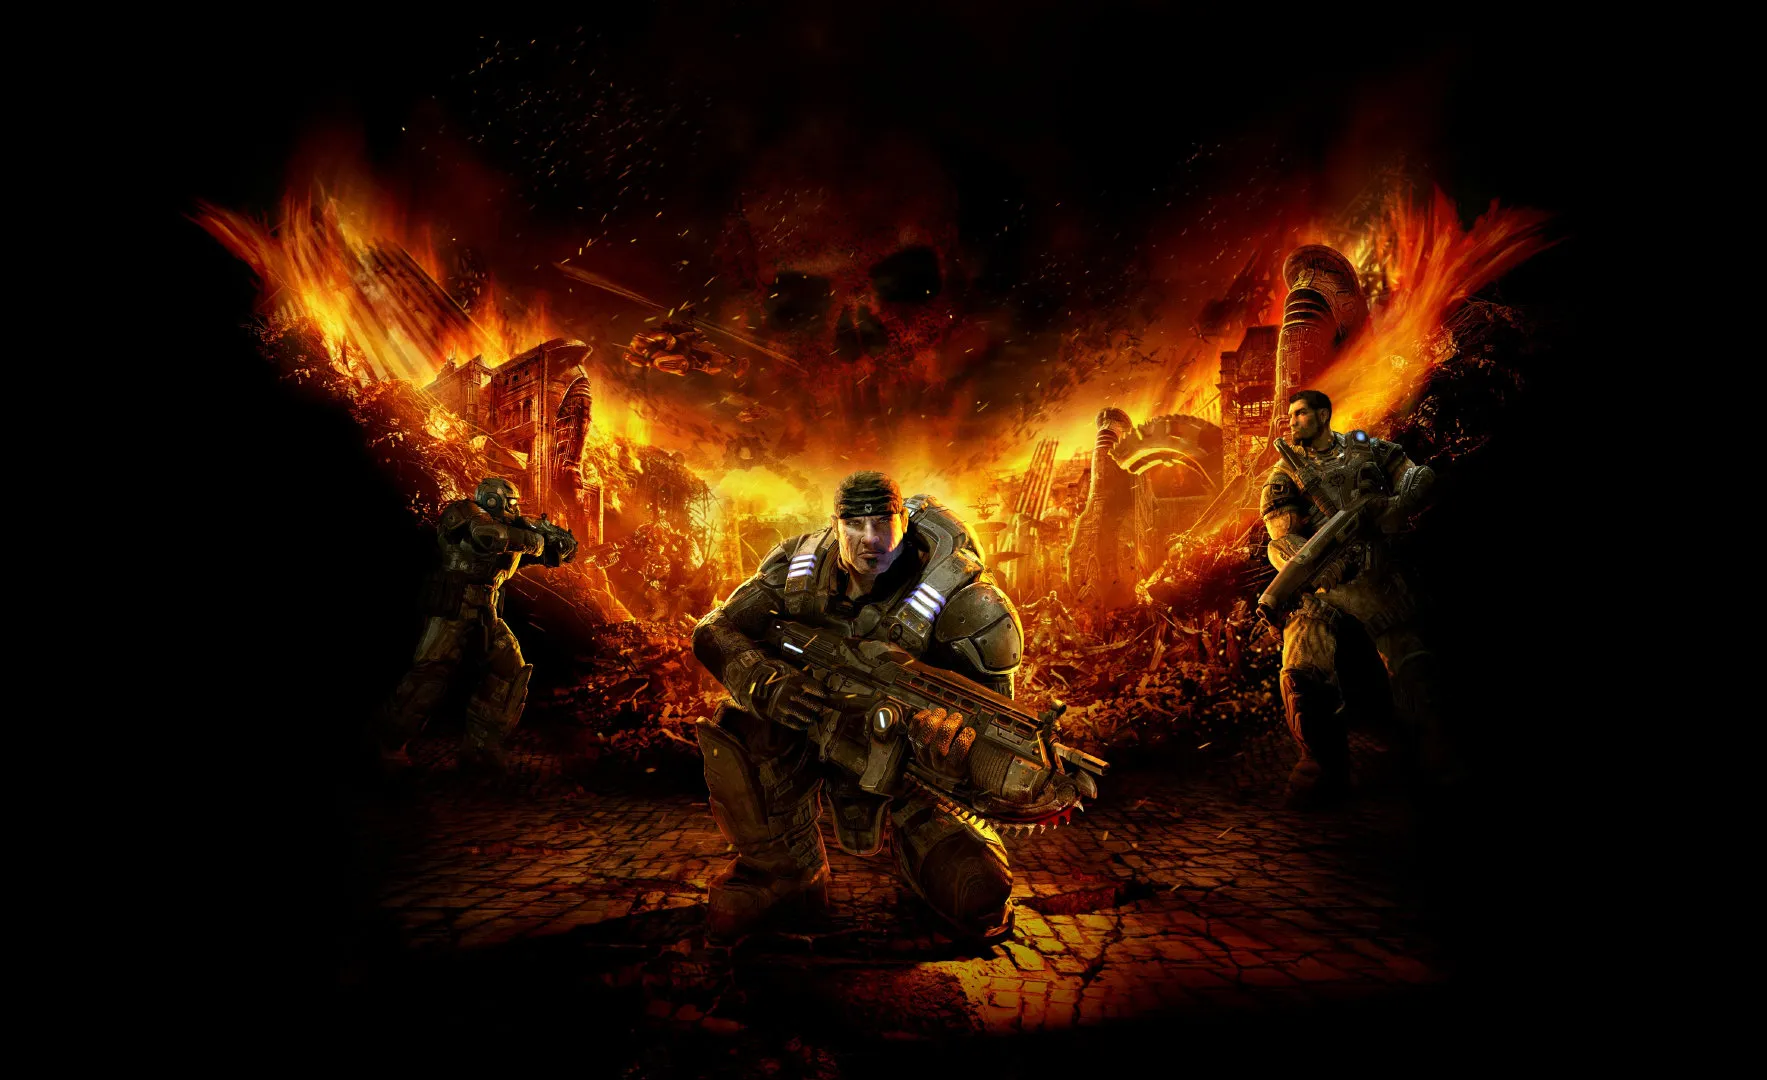 Netflix takes film and TV rights to the famous game 'Gears of War' | FMV6